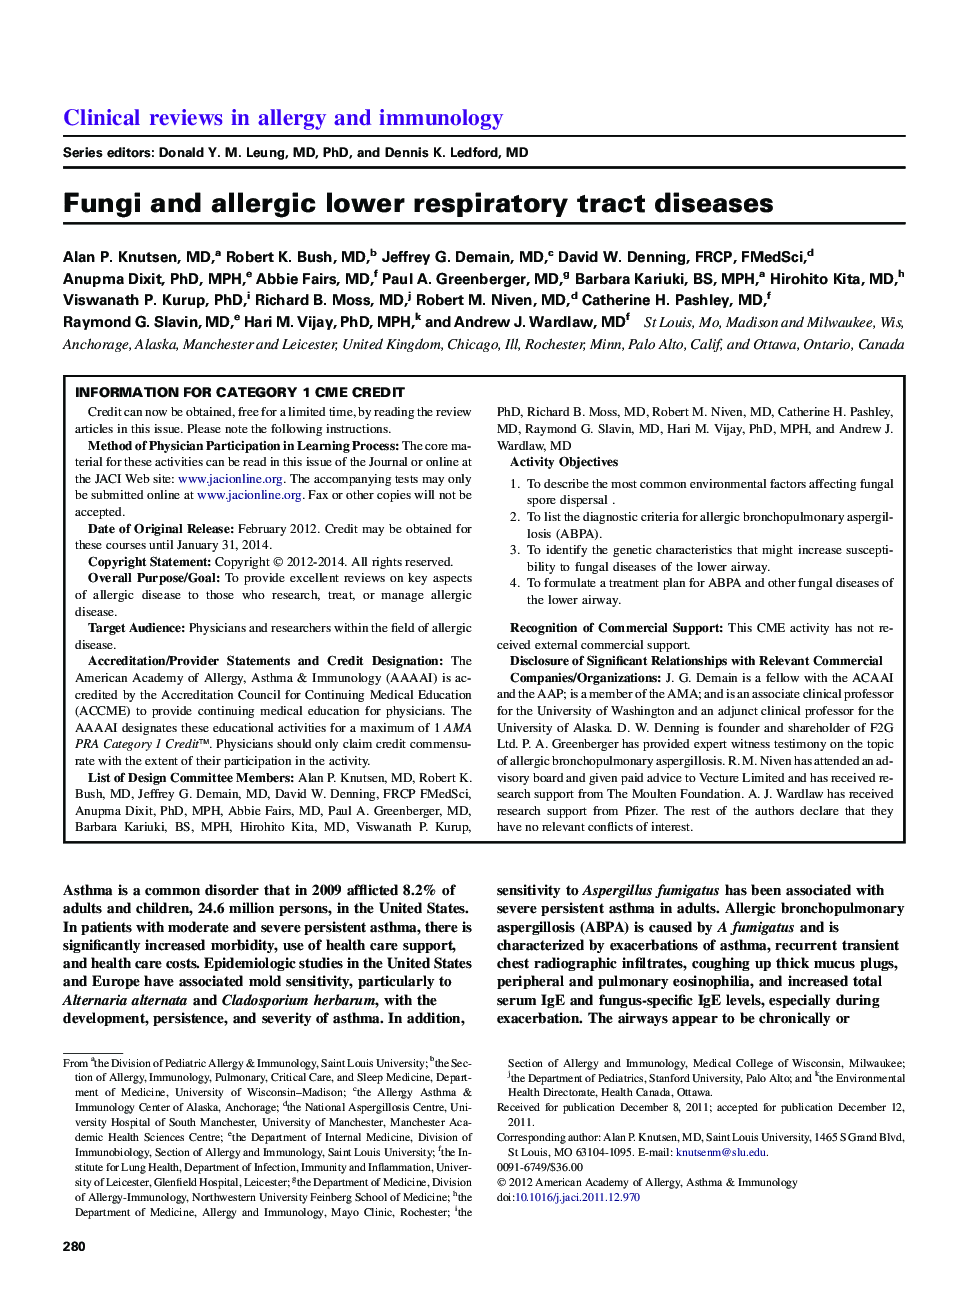 Fungi and allergic lower respiratory tract diseases 